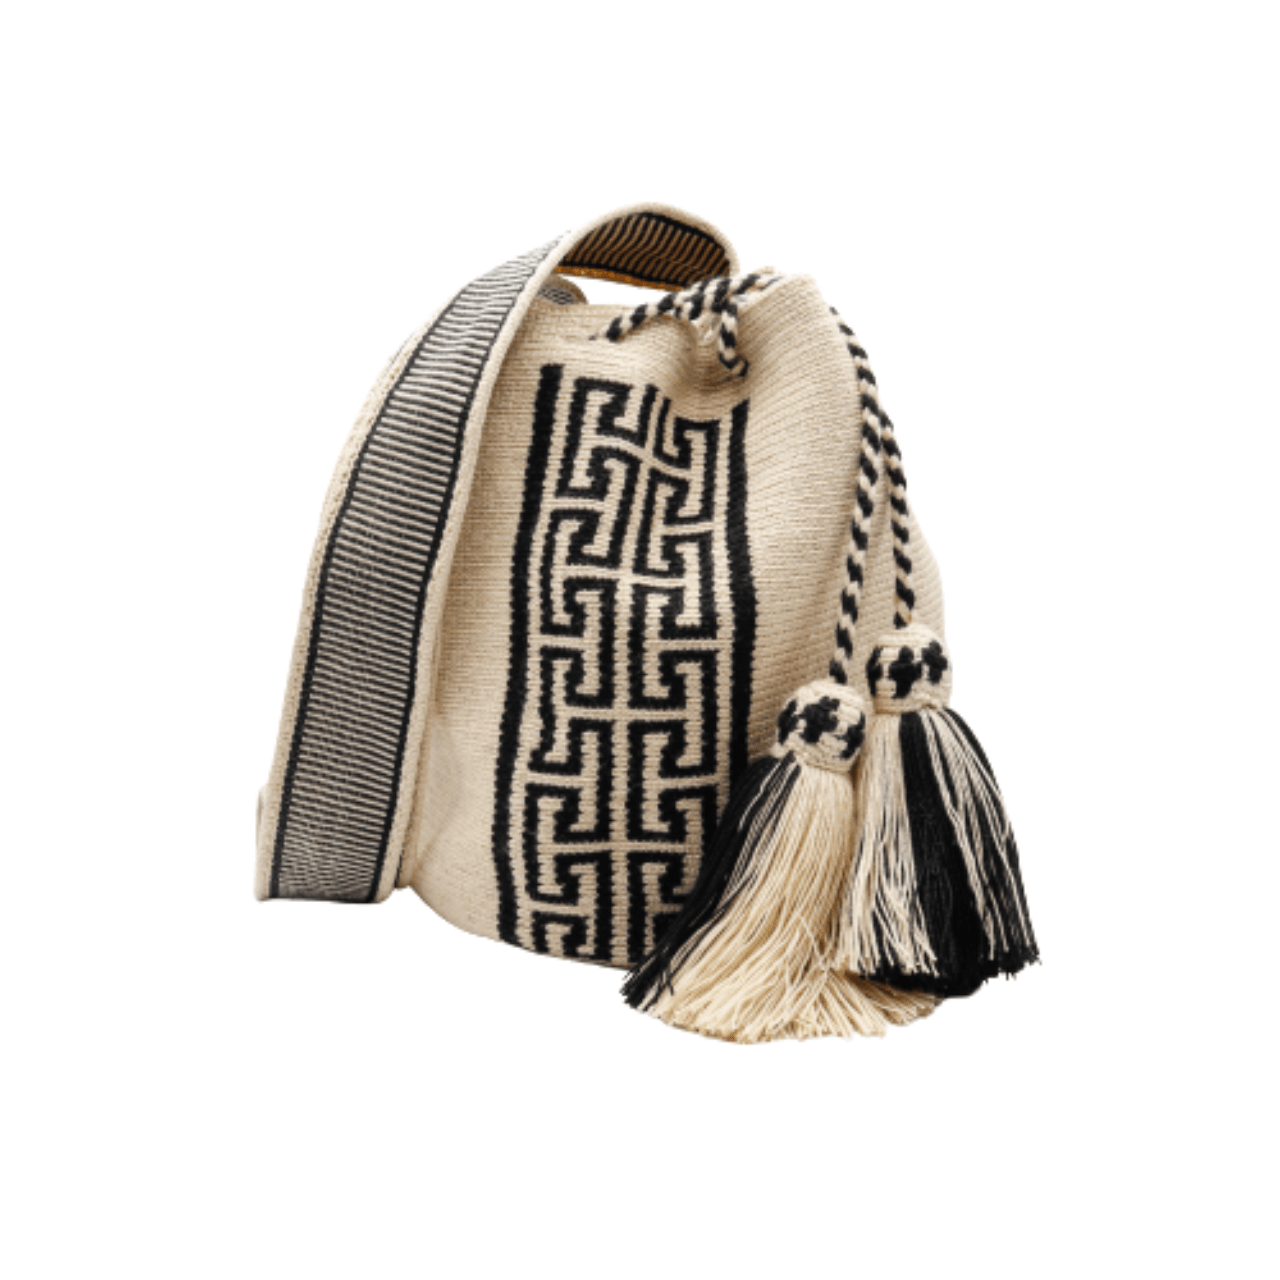 Mabel Wayuu Bag - Authentic Colombian Design - Neutral Black and Beige Colors - A Chic Accessory Bringing a Piece of Colombia's Culture